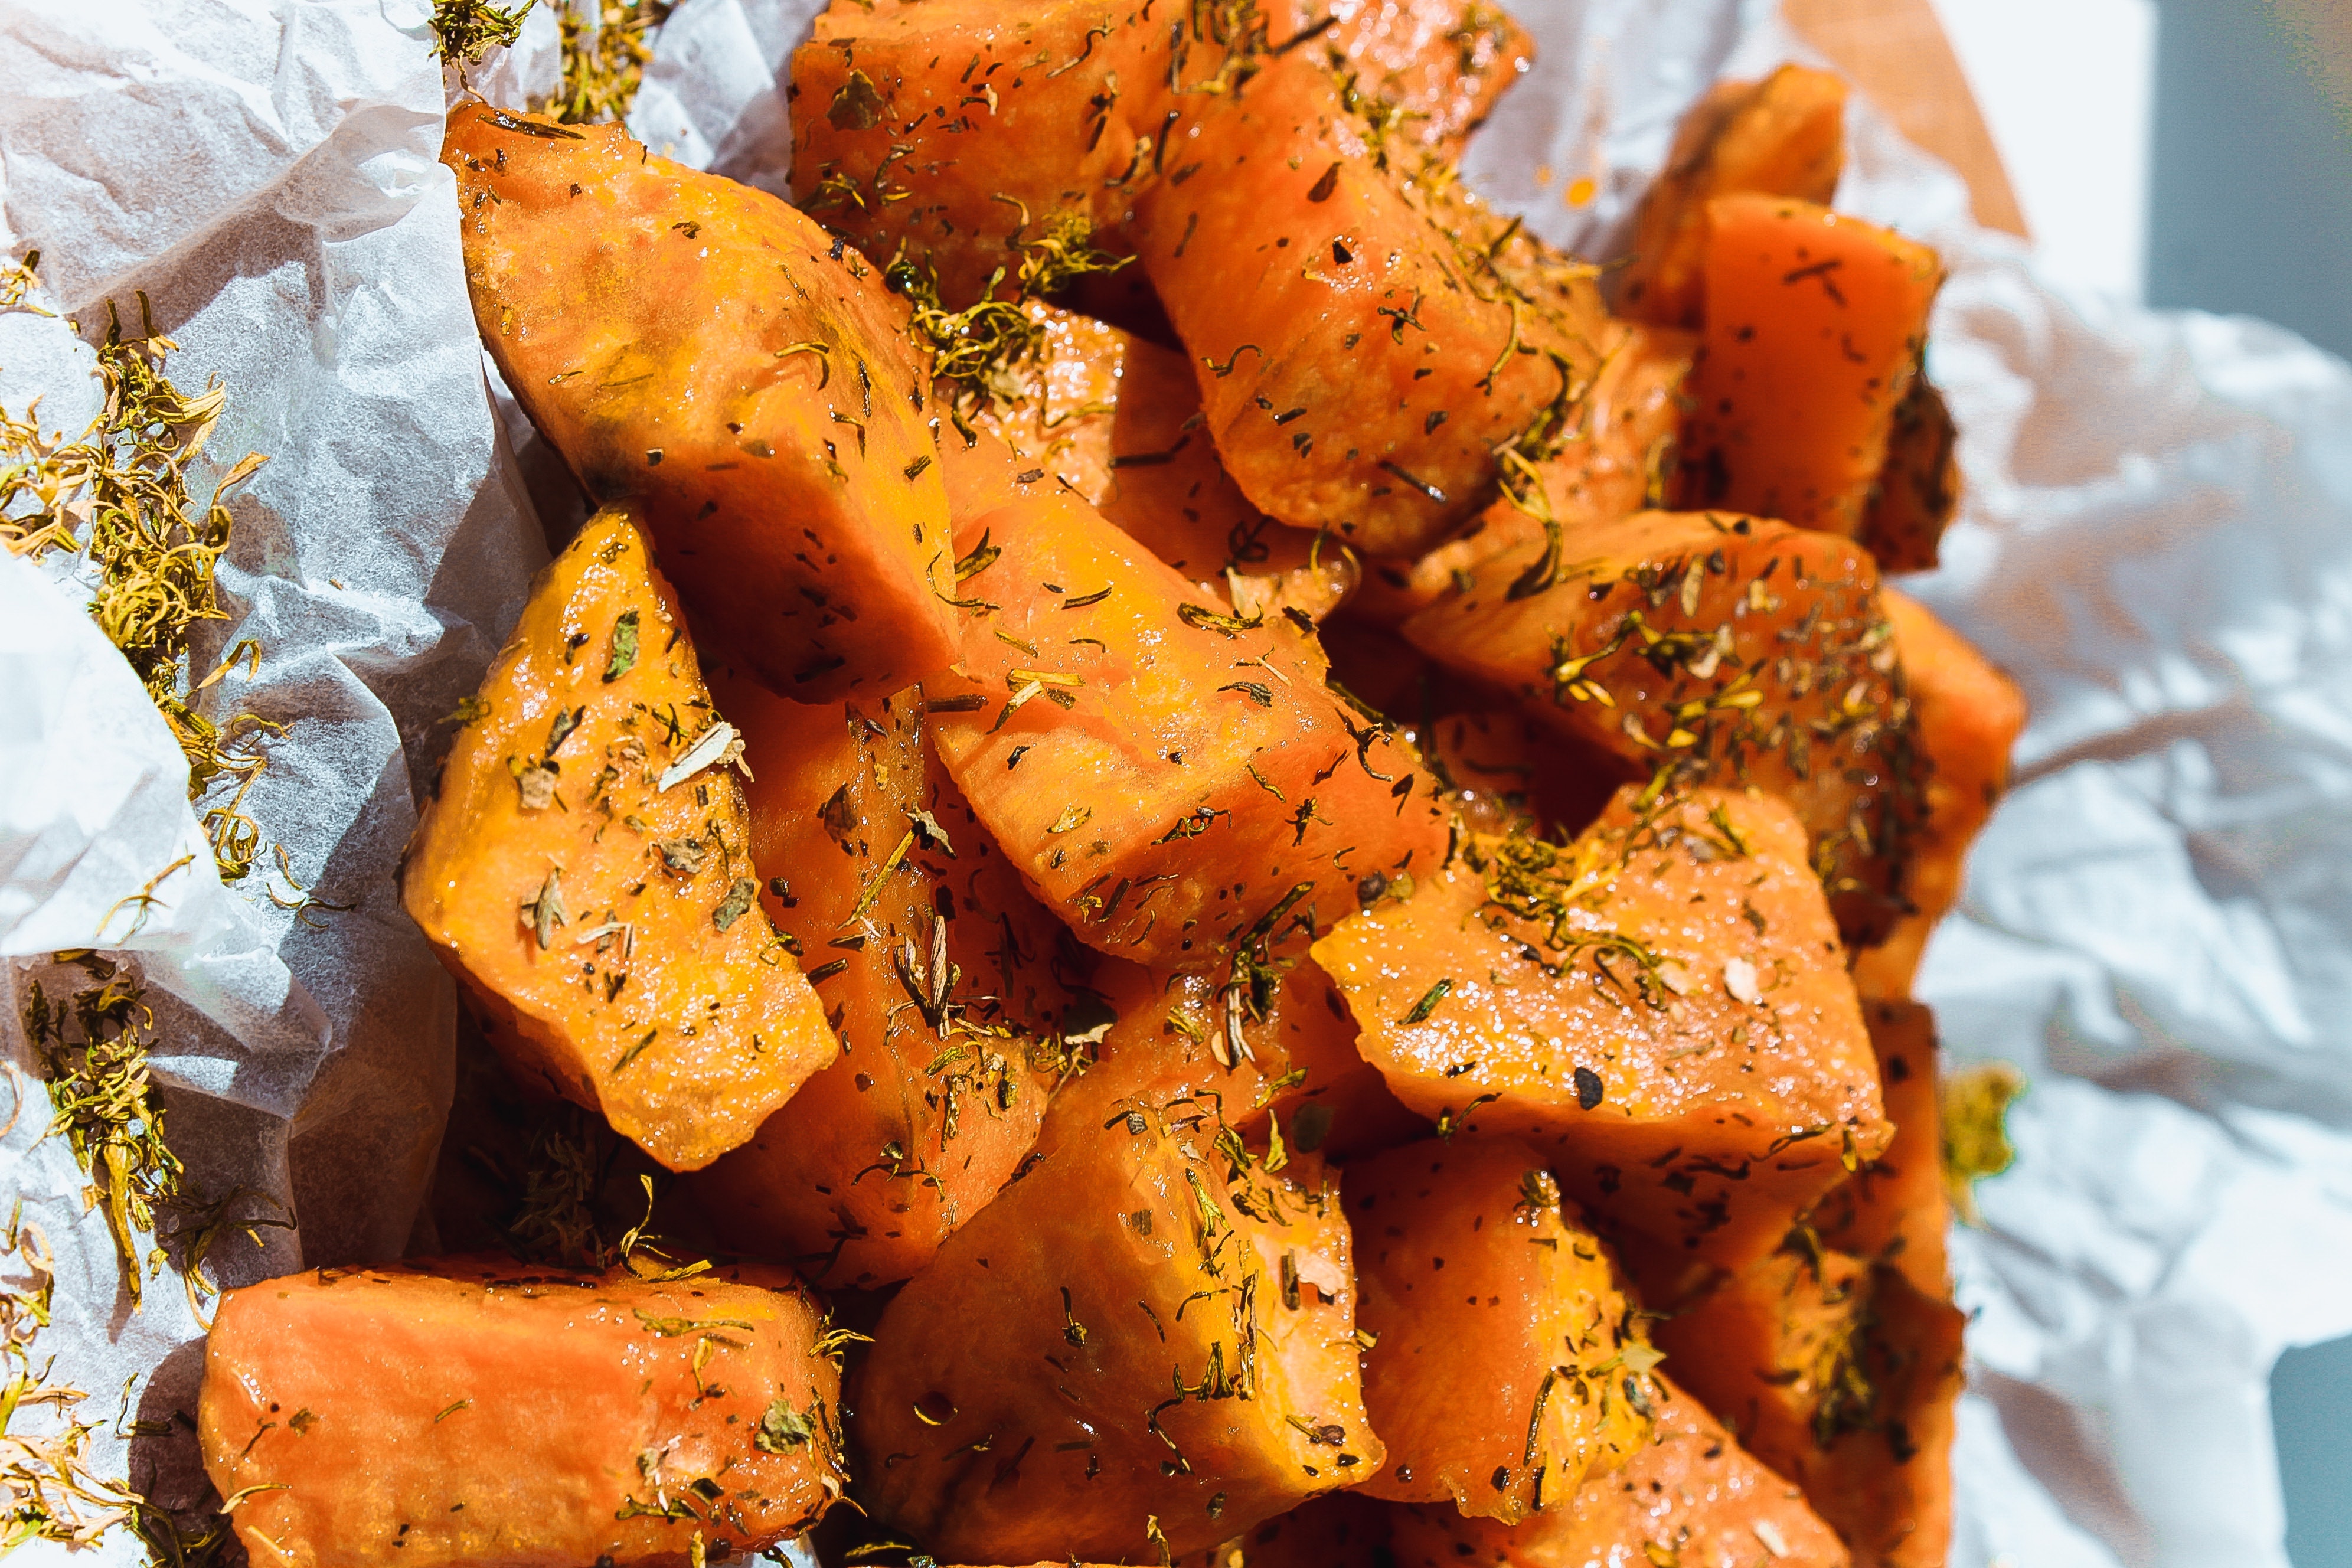 Sweet potato salad is great for a gut-friendly picnic because its high-fibre content